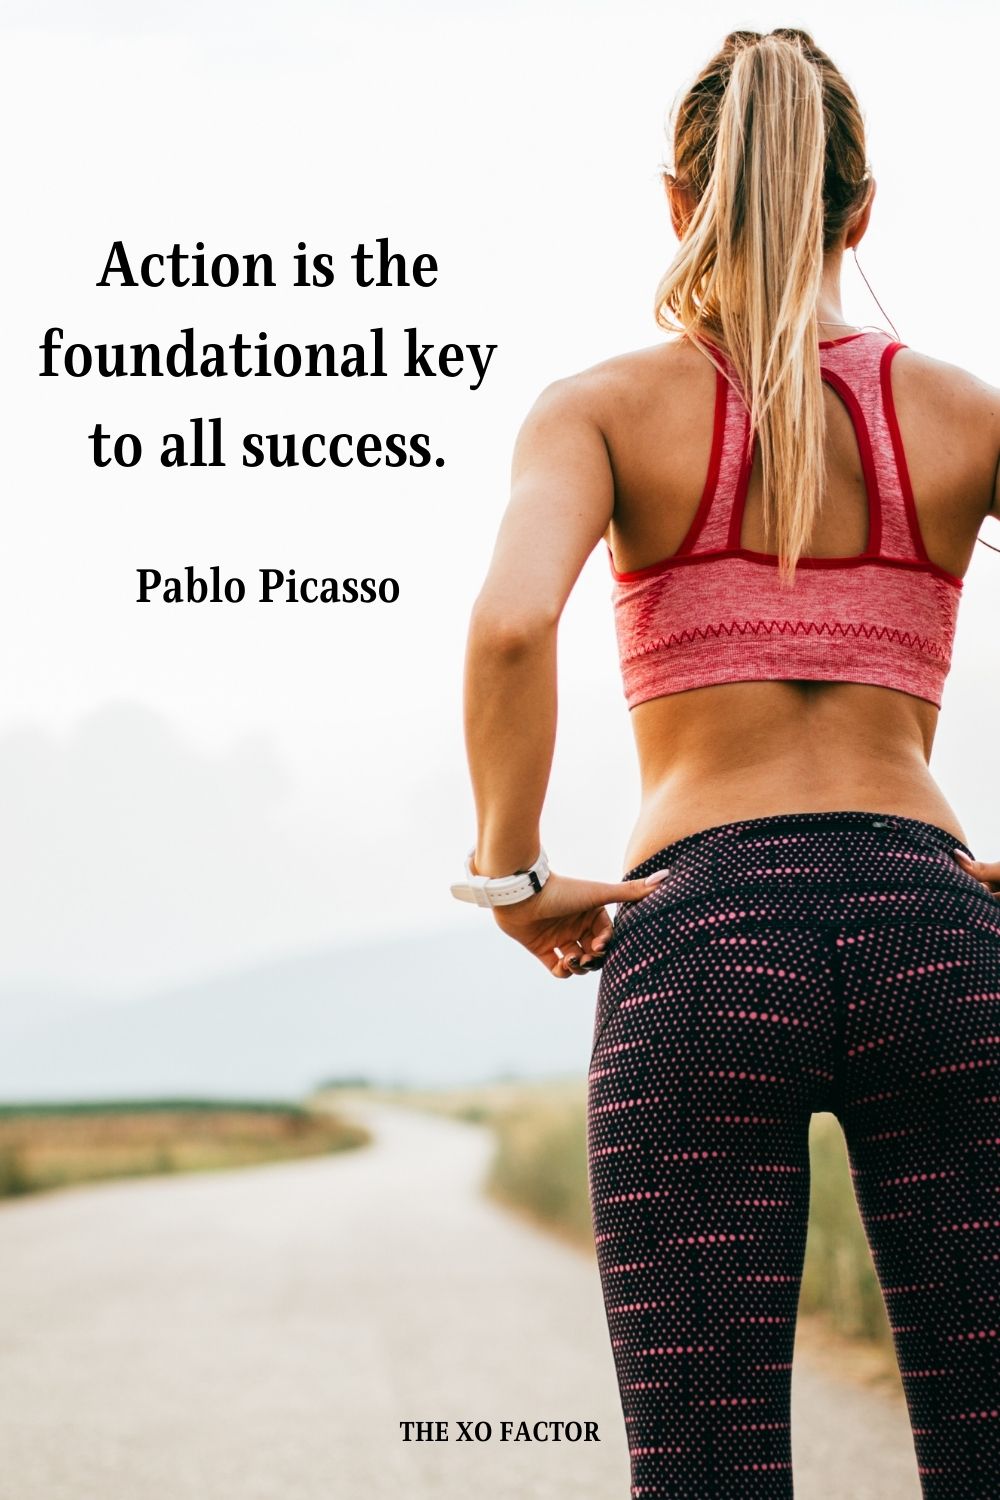 Action is the foundational key to all success. Pablo Picasso